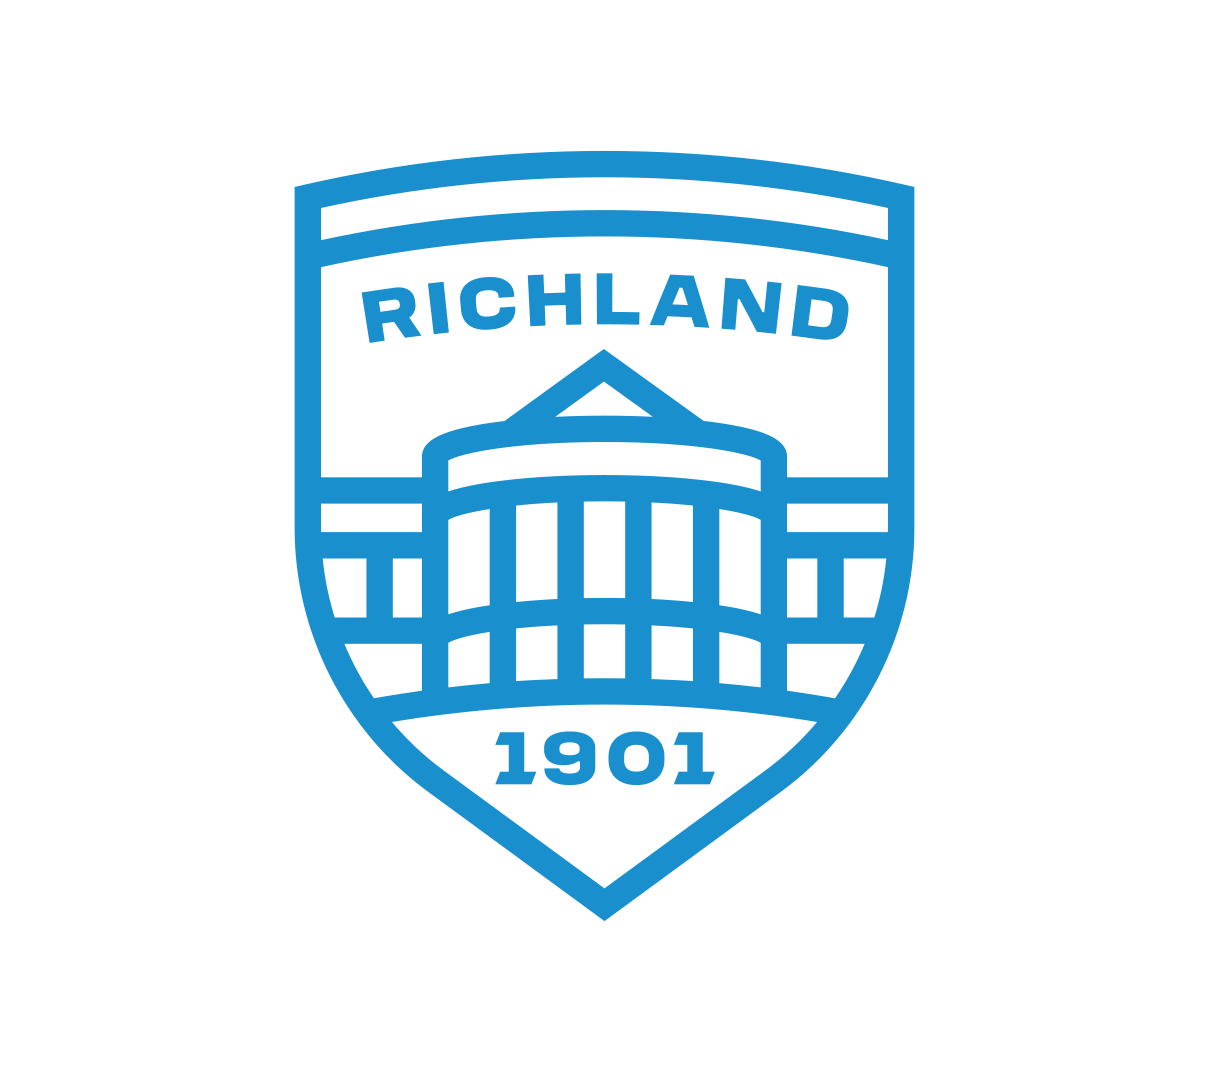 Richland Country Club crest in light blue